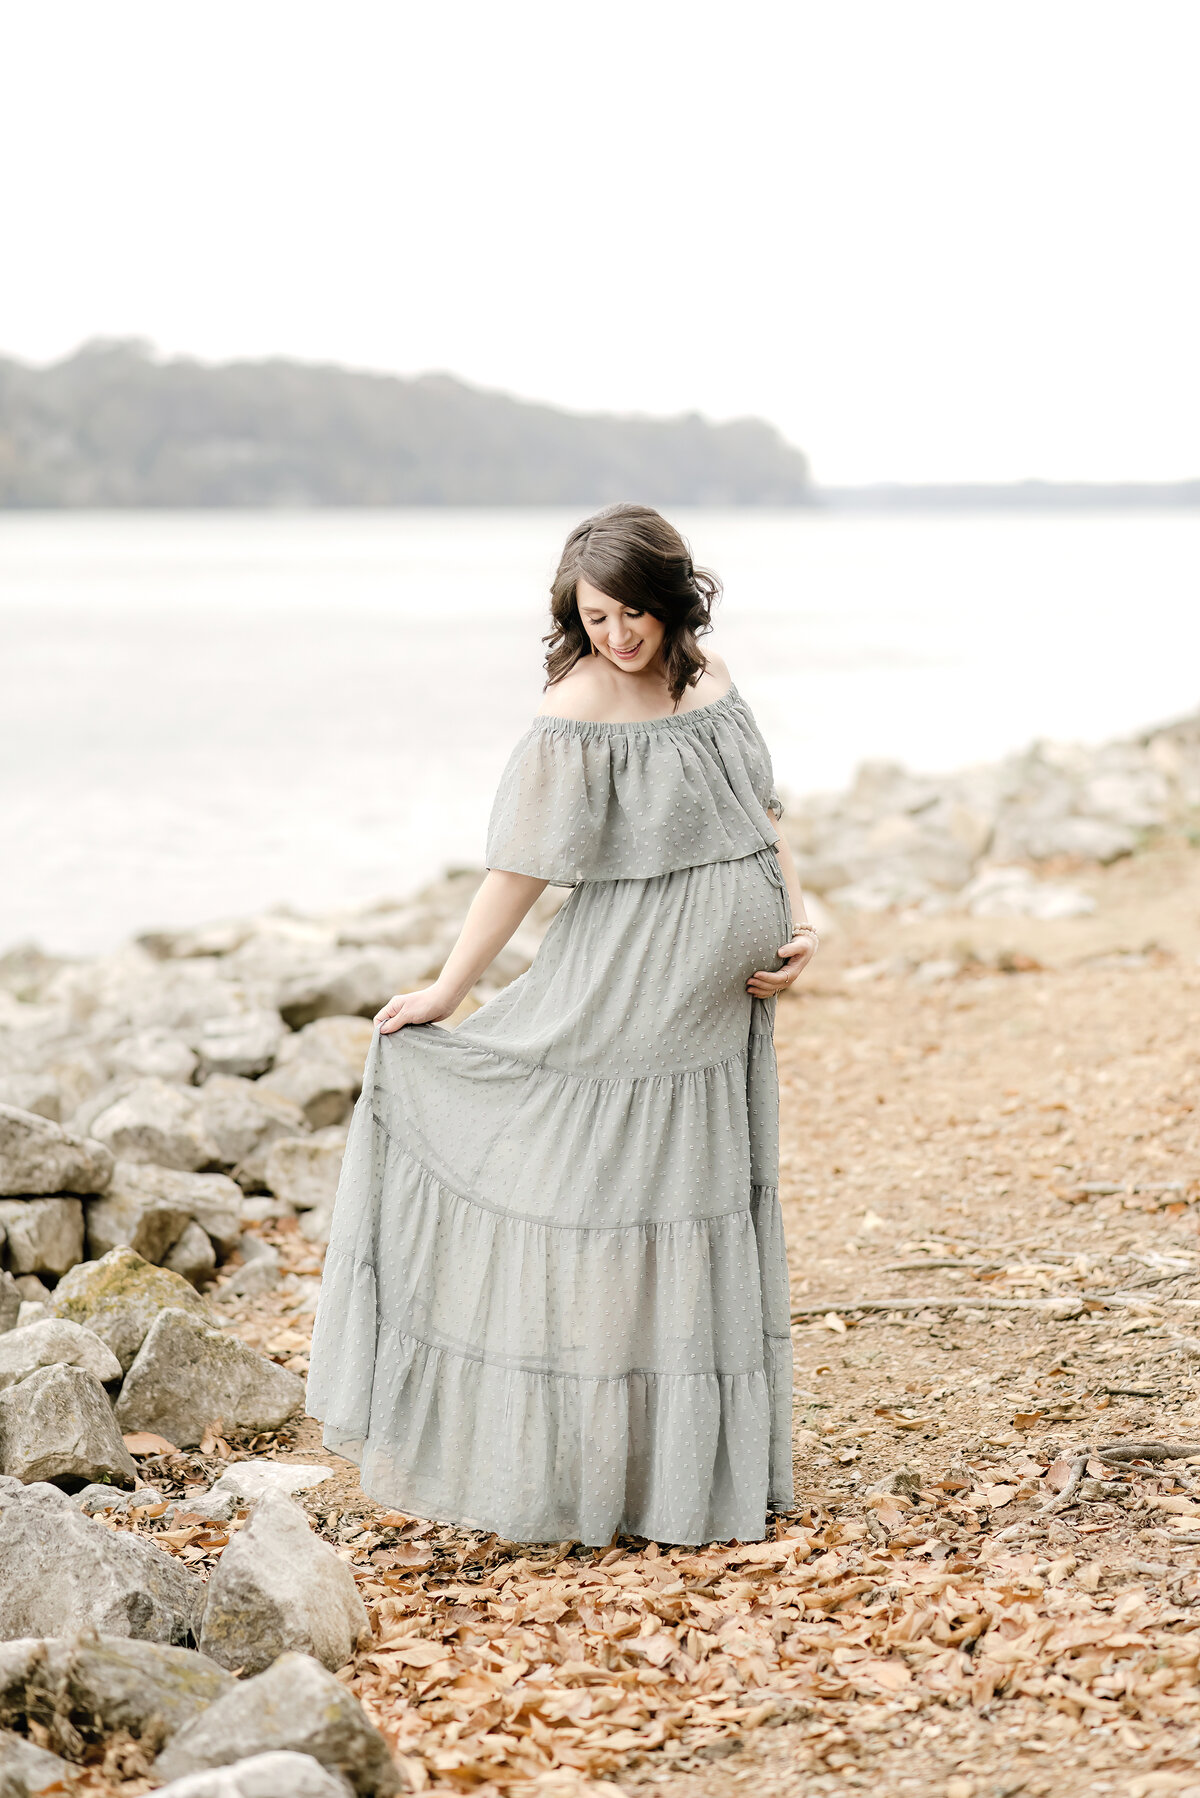 Pregnant woman in teal dress by river and rocks